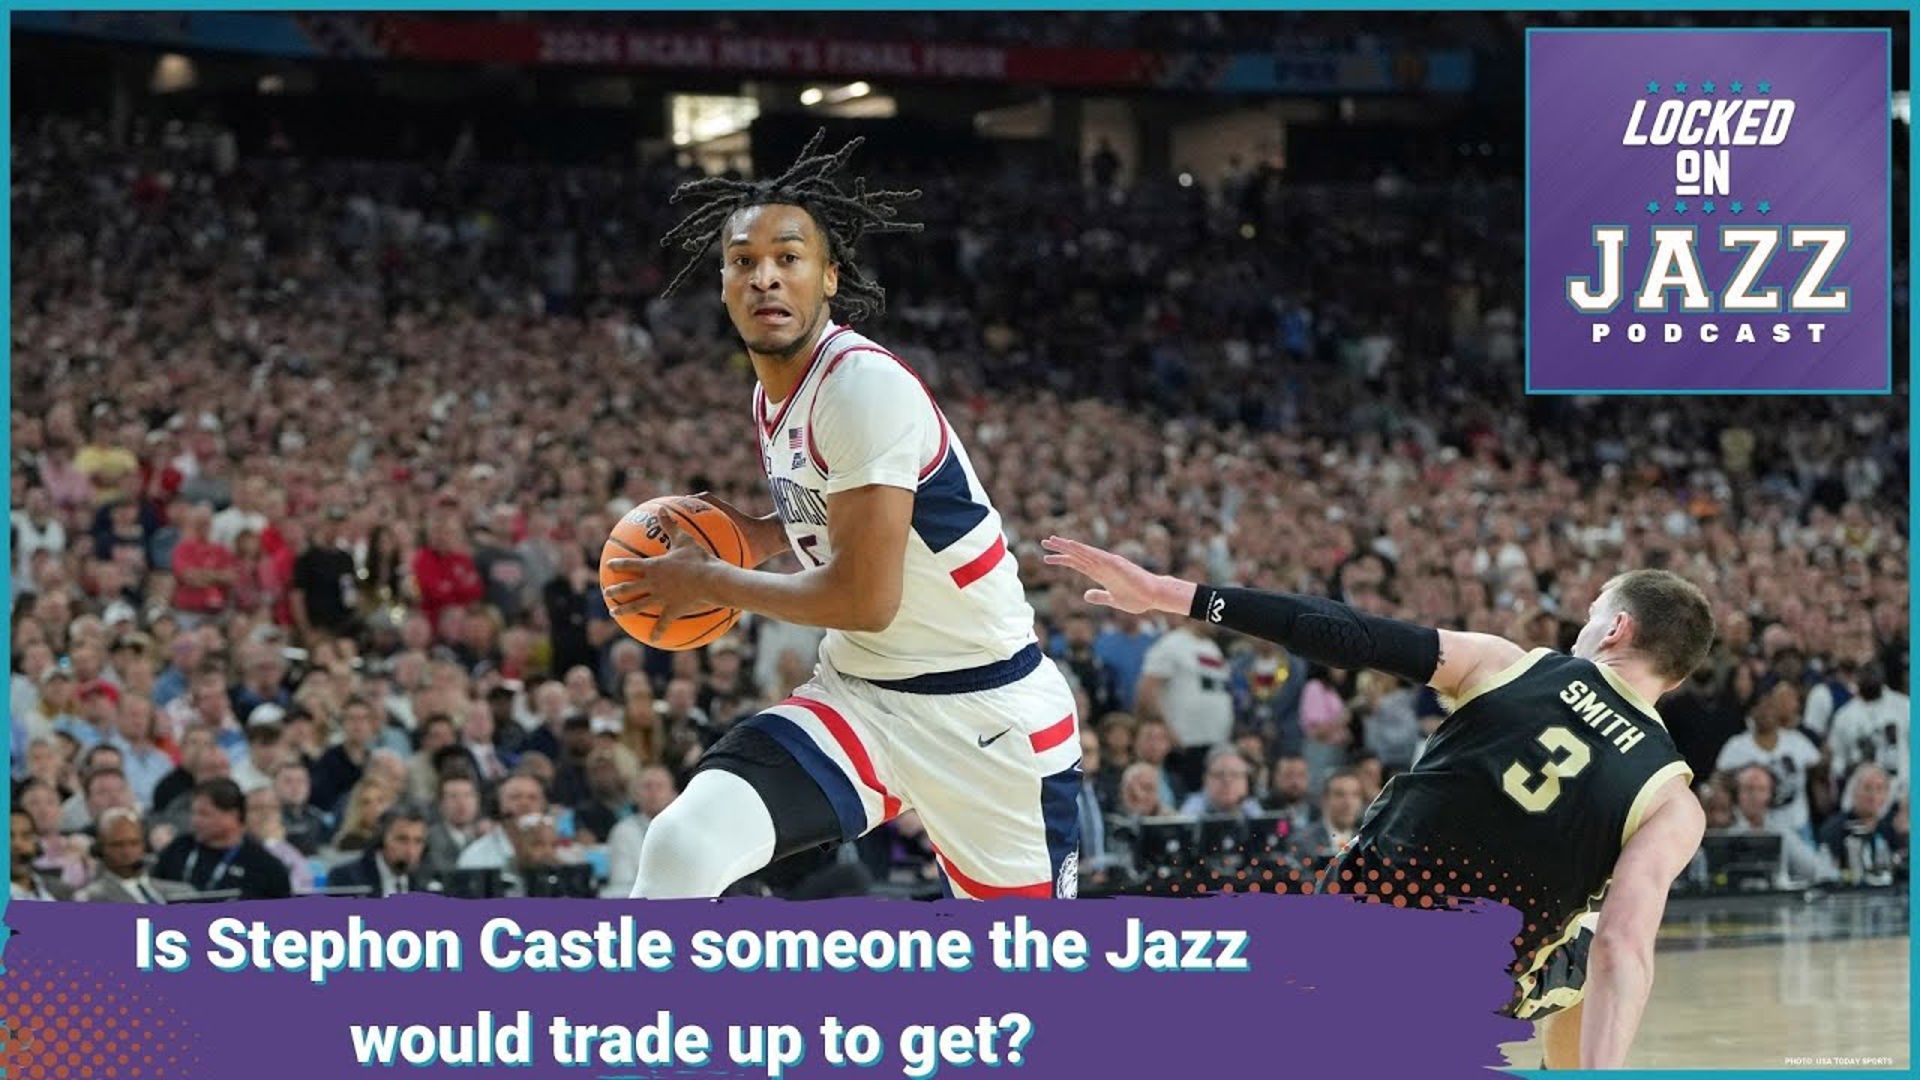 Leif Thulin breaks down the pros and cons of the Jazz trading up in this draft class that is deemed weak.  Is Stephon Castle the guy the Jazz brass are looking for?